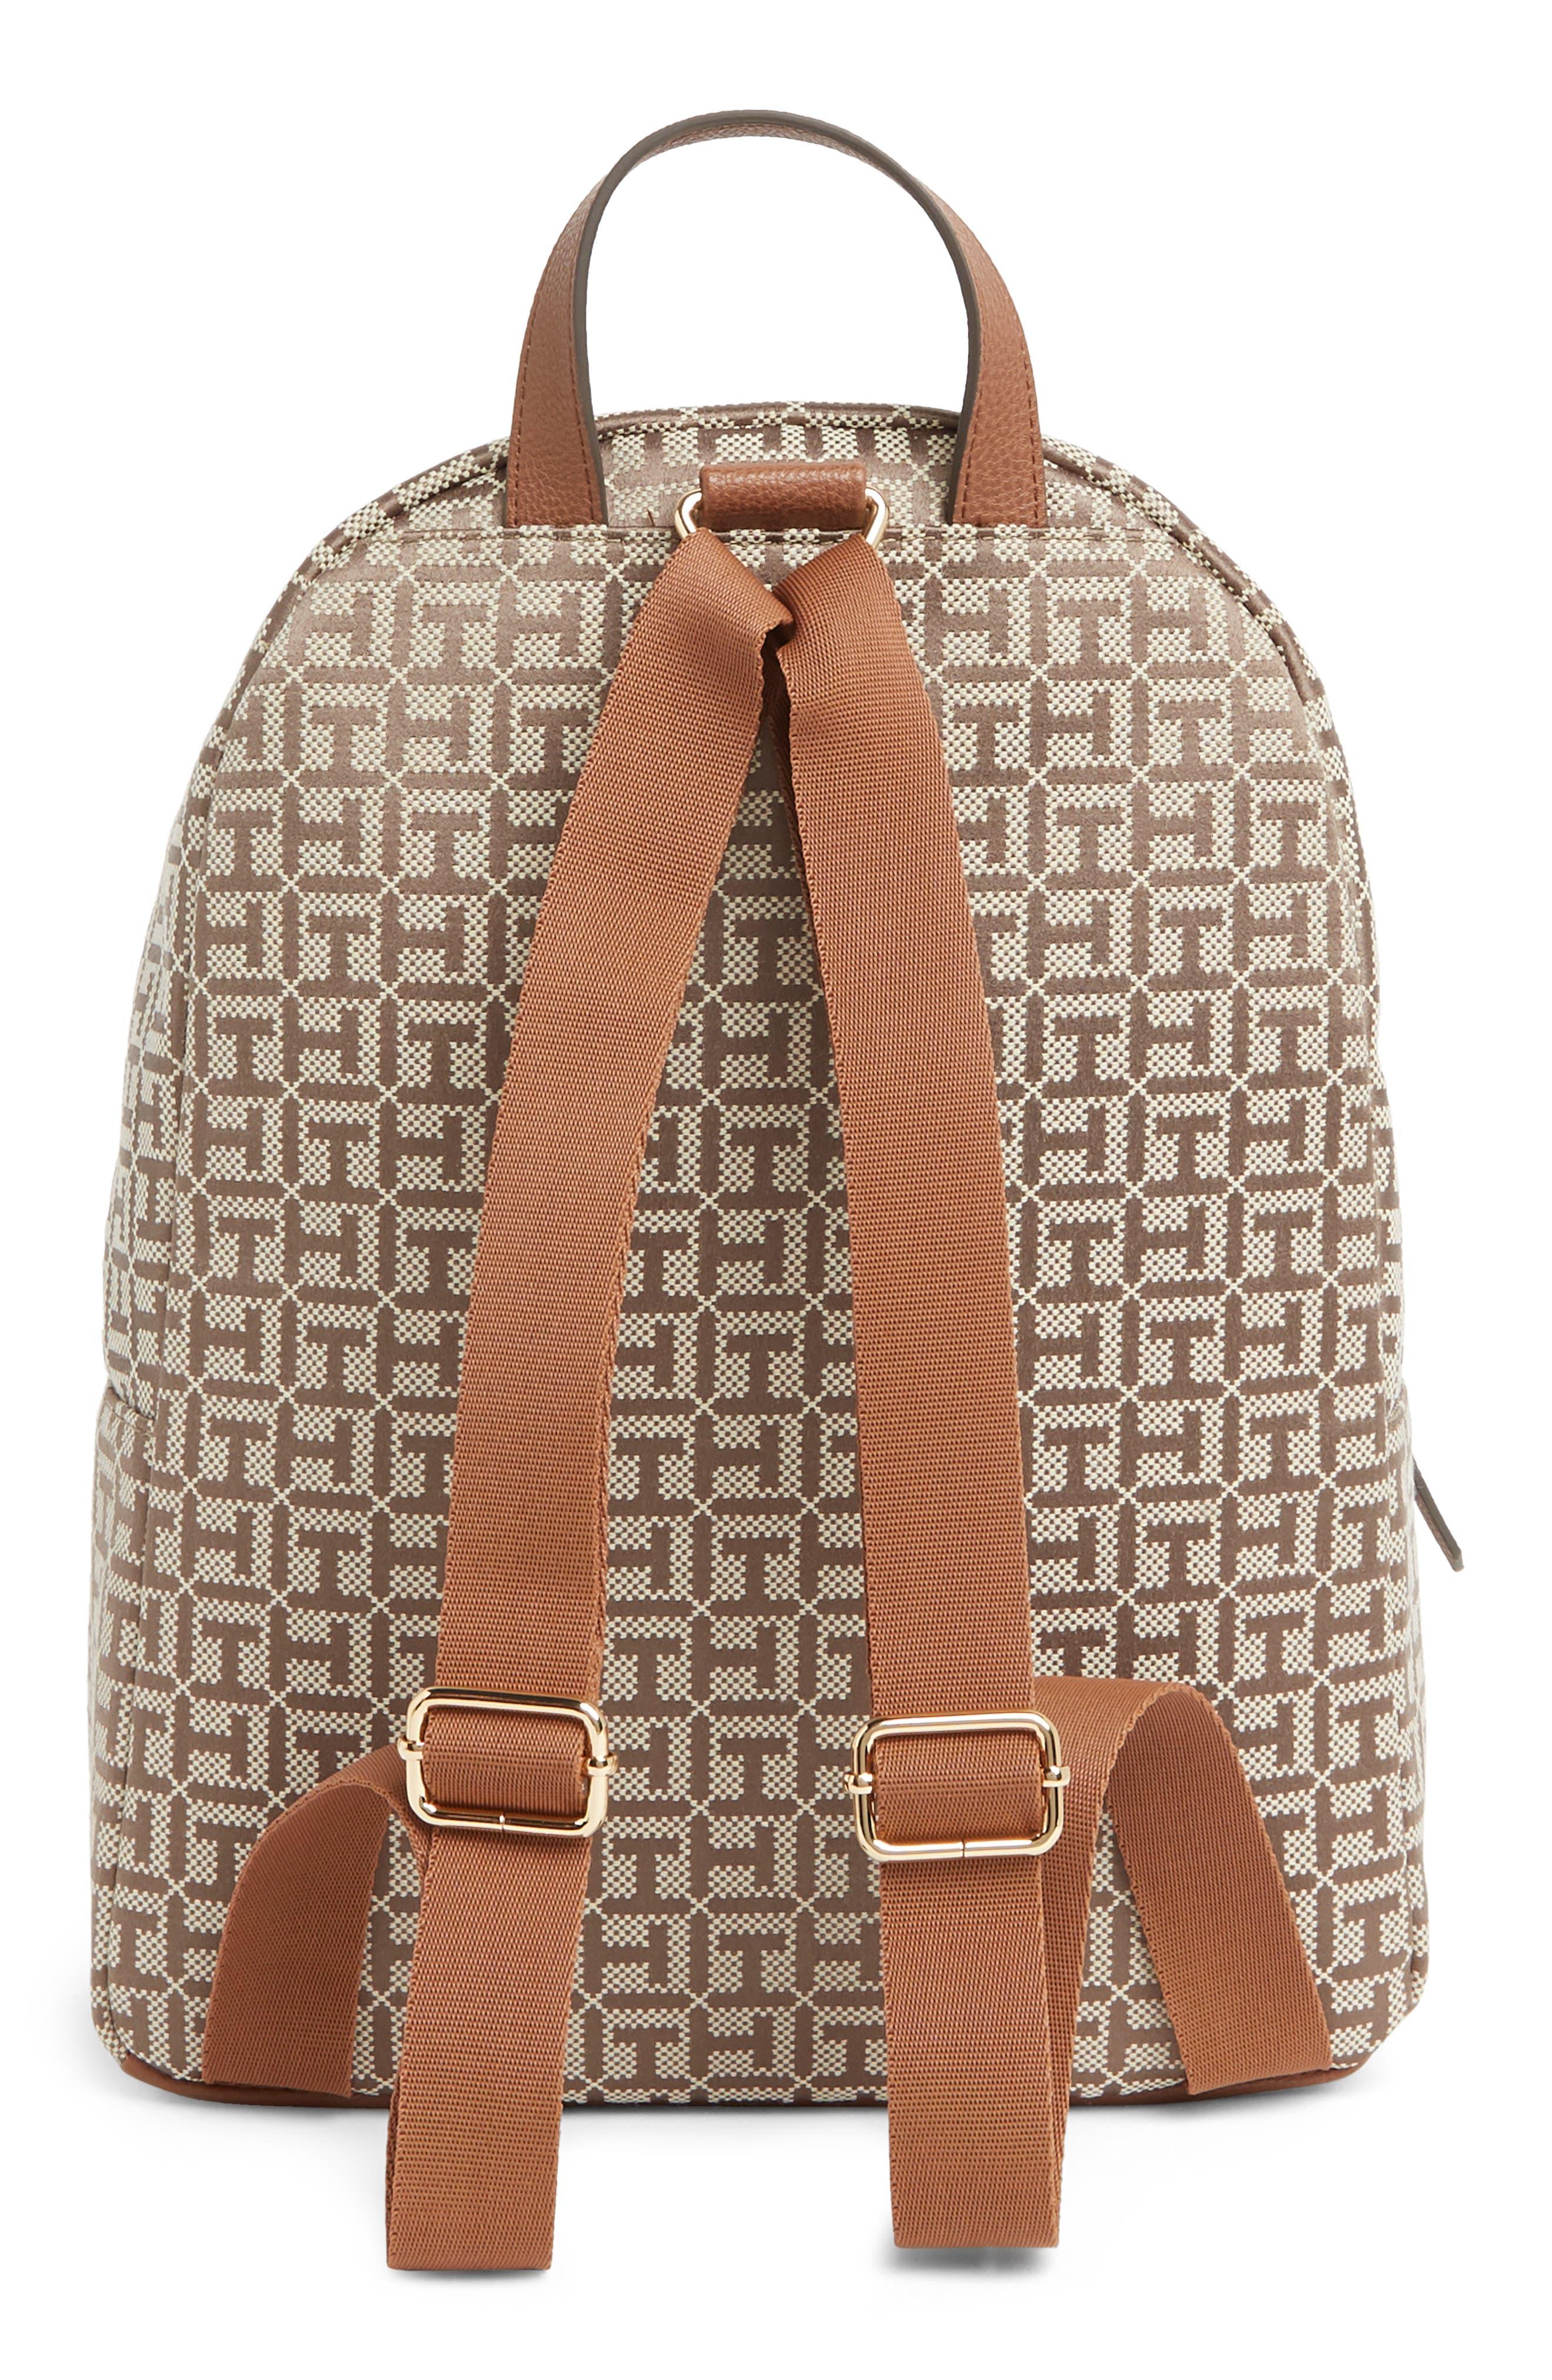 Tommy Hilfiger Alexis Ii Dome Backpack in Natural | Lyst